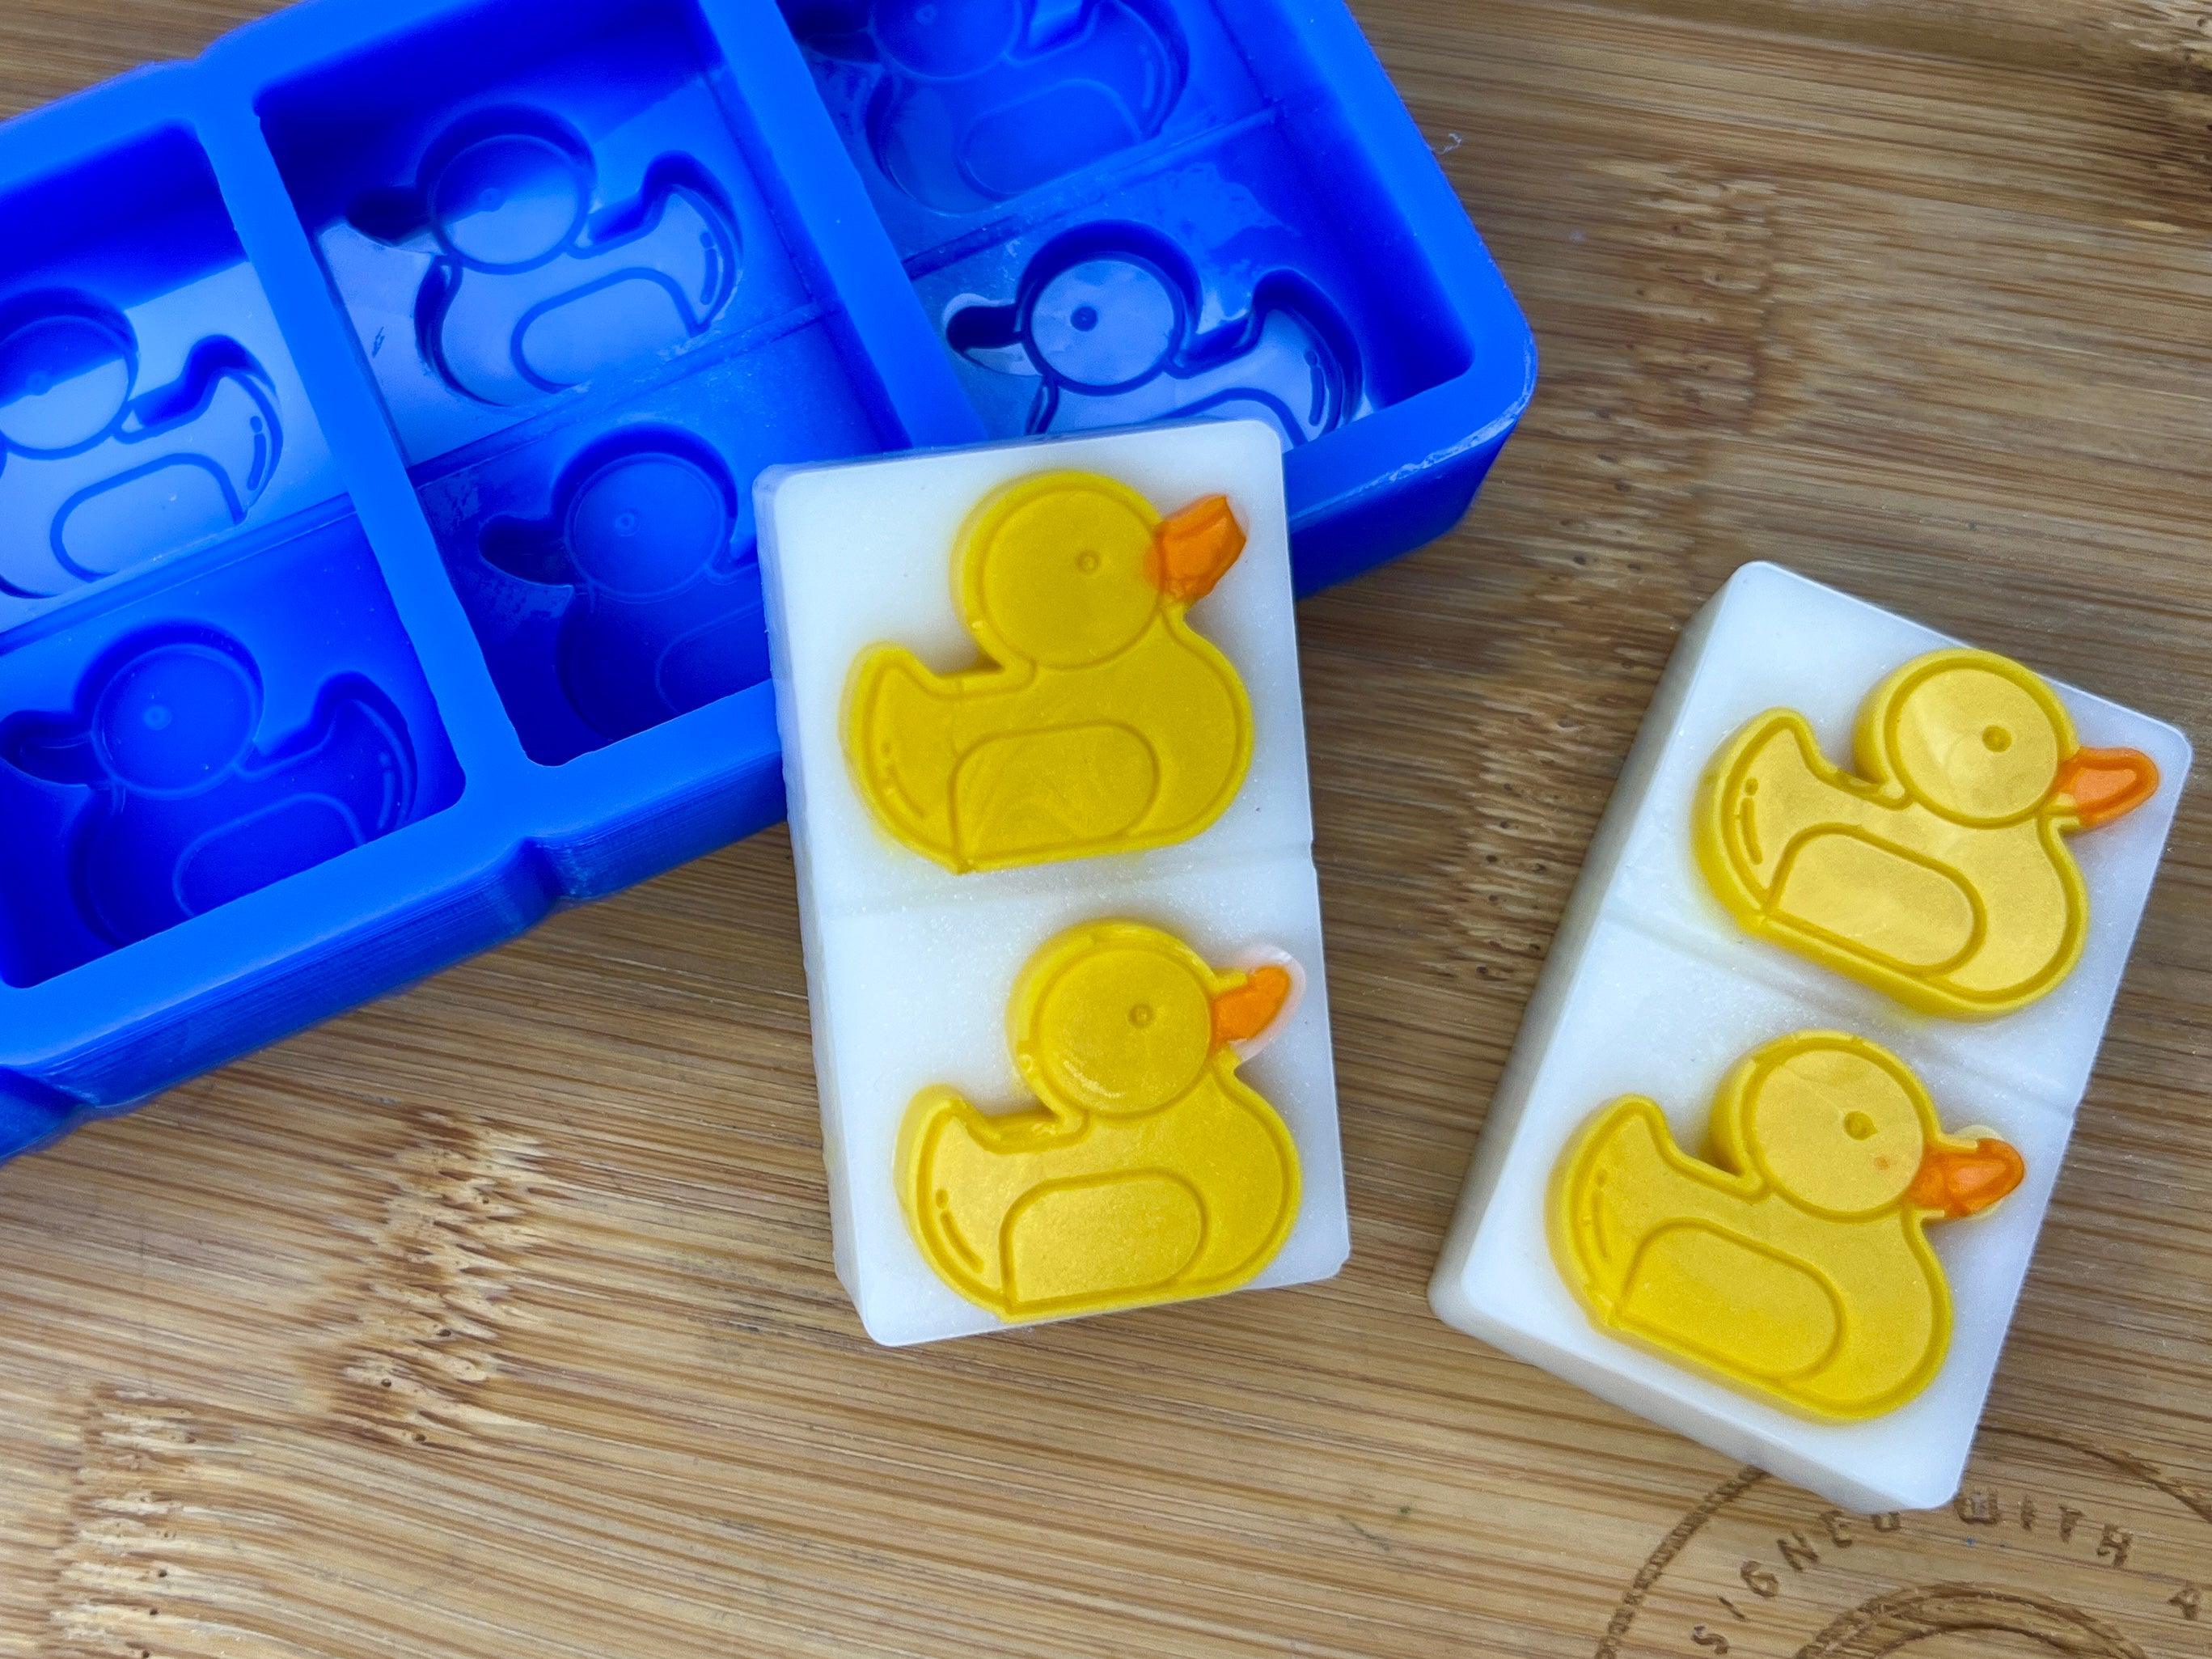 Rubber Duck Silicone Mold - HoBa Edition - Designed with a Twist - Top quality silicone molds made in the UK.